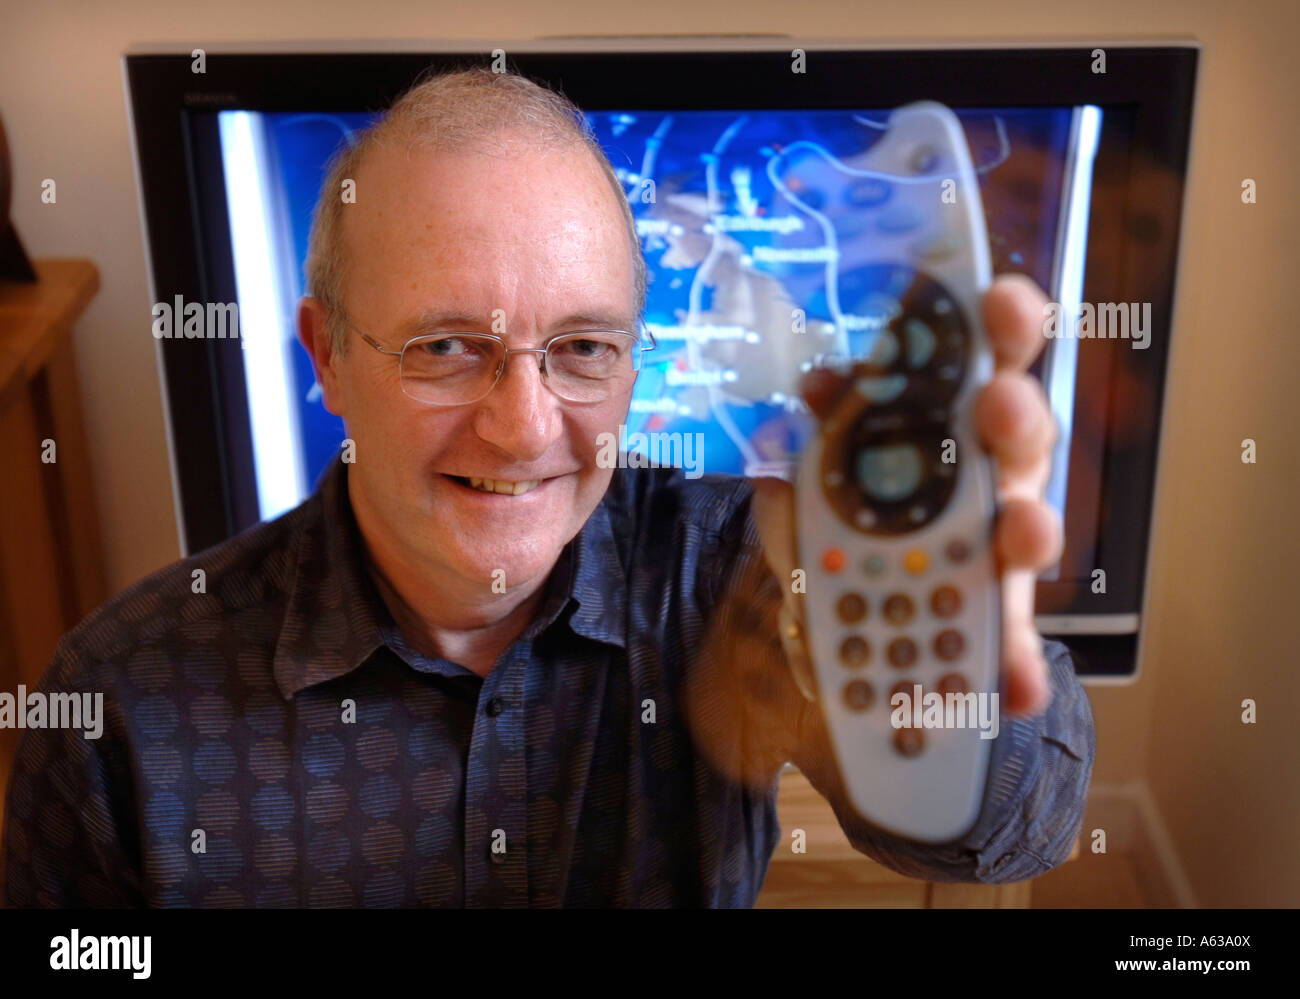 A MIDDLE AGED MAN WITH A REMOTE CONTROL WHILE A WEATHER FORECAST PROGRAMME APPEARS ON TELEVISION UK Stock Photo